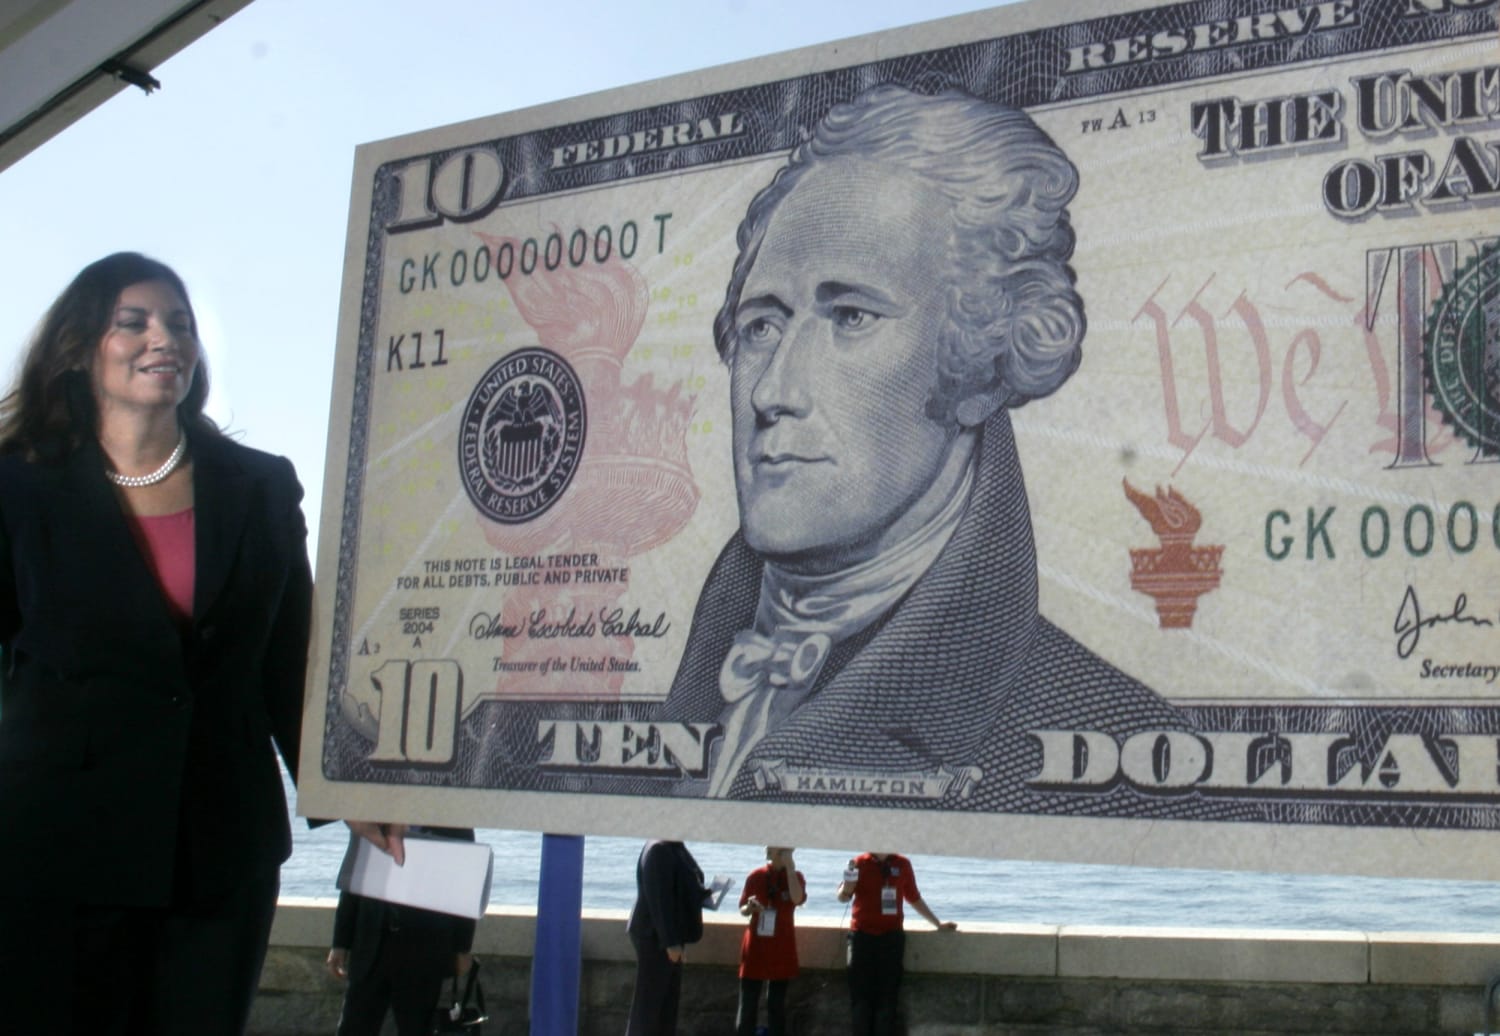 Treasury Department to Put a Woman on the $10 Bill in 2020